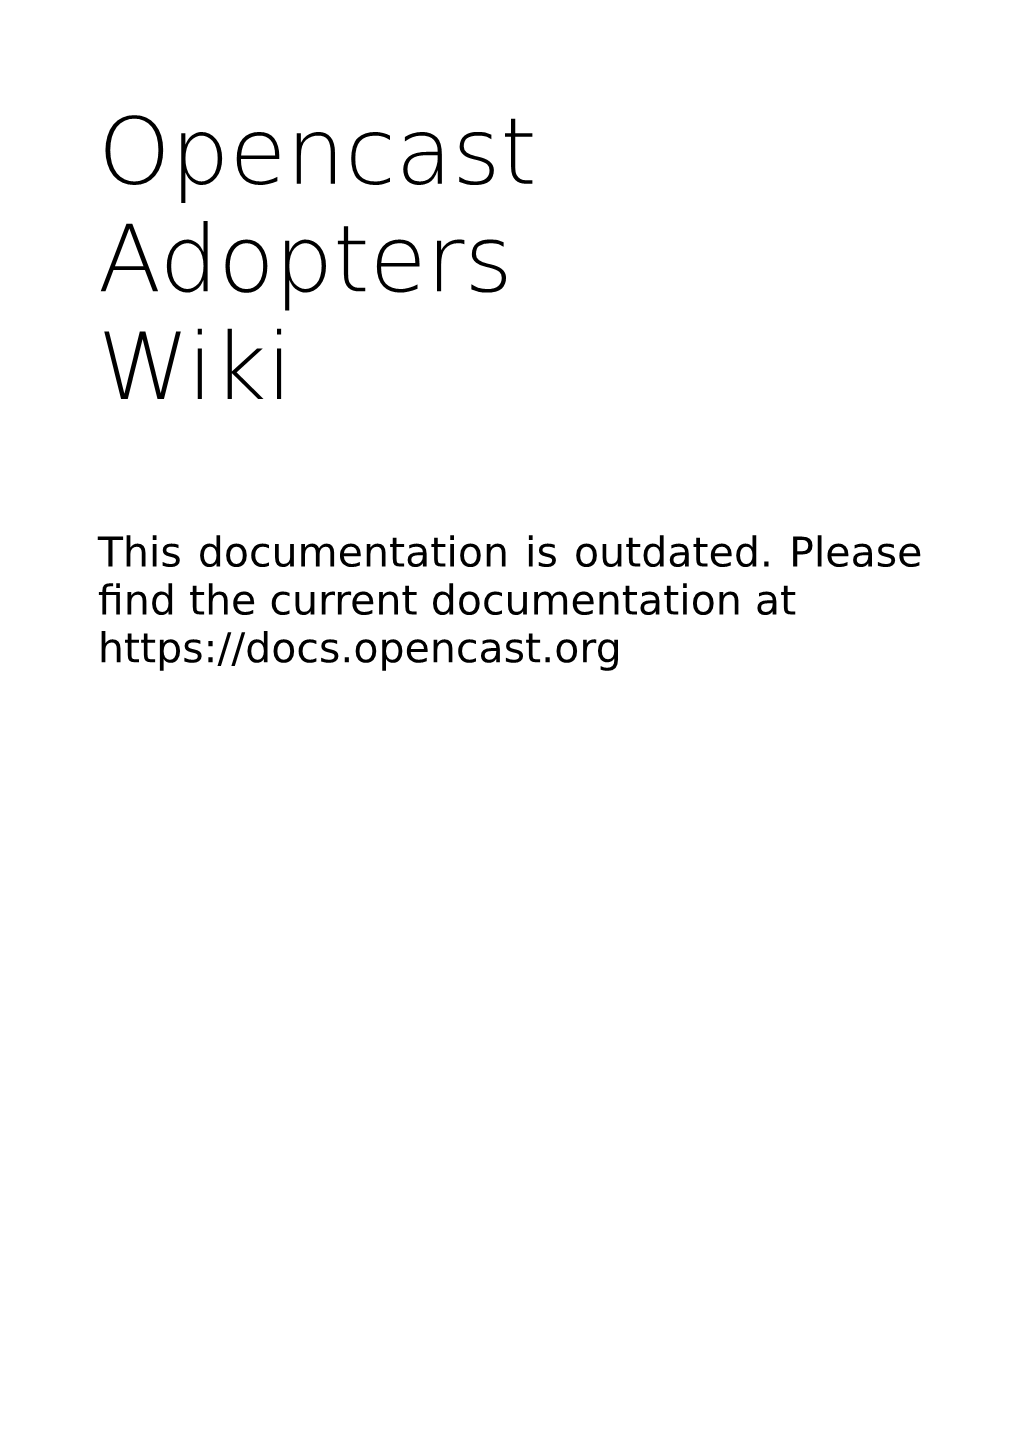 Opencast Adopters Wiki